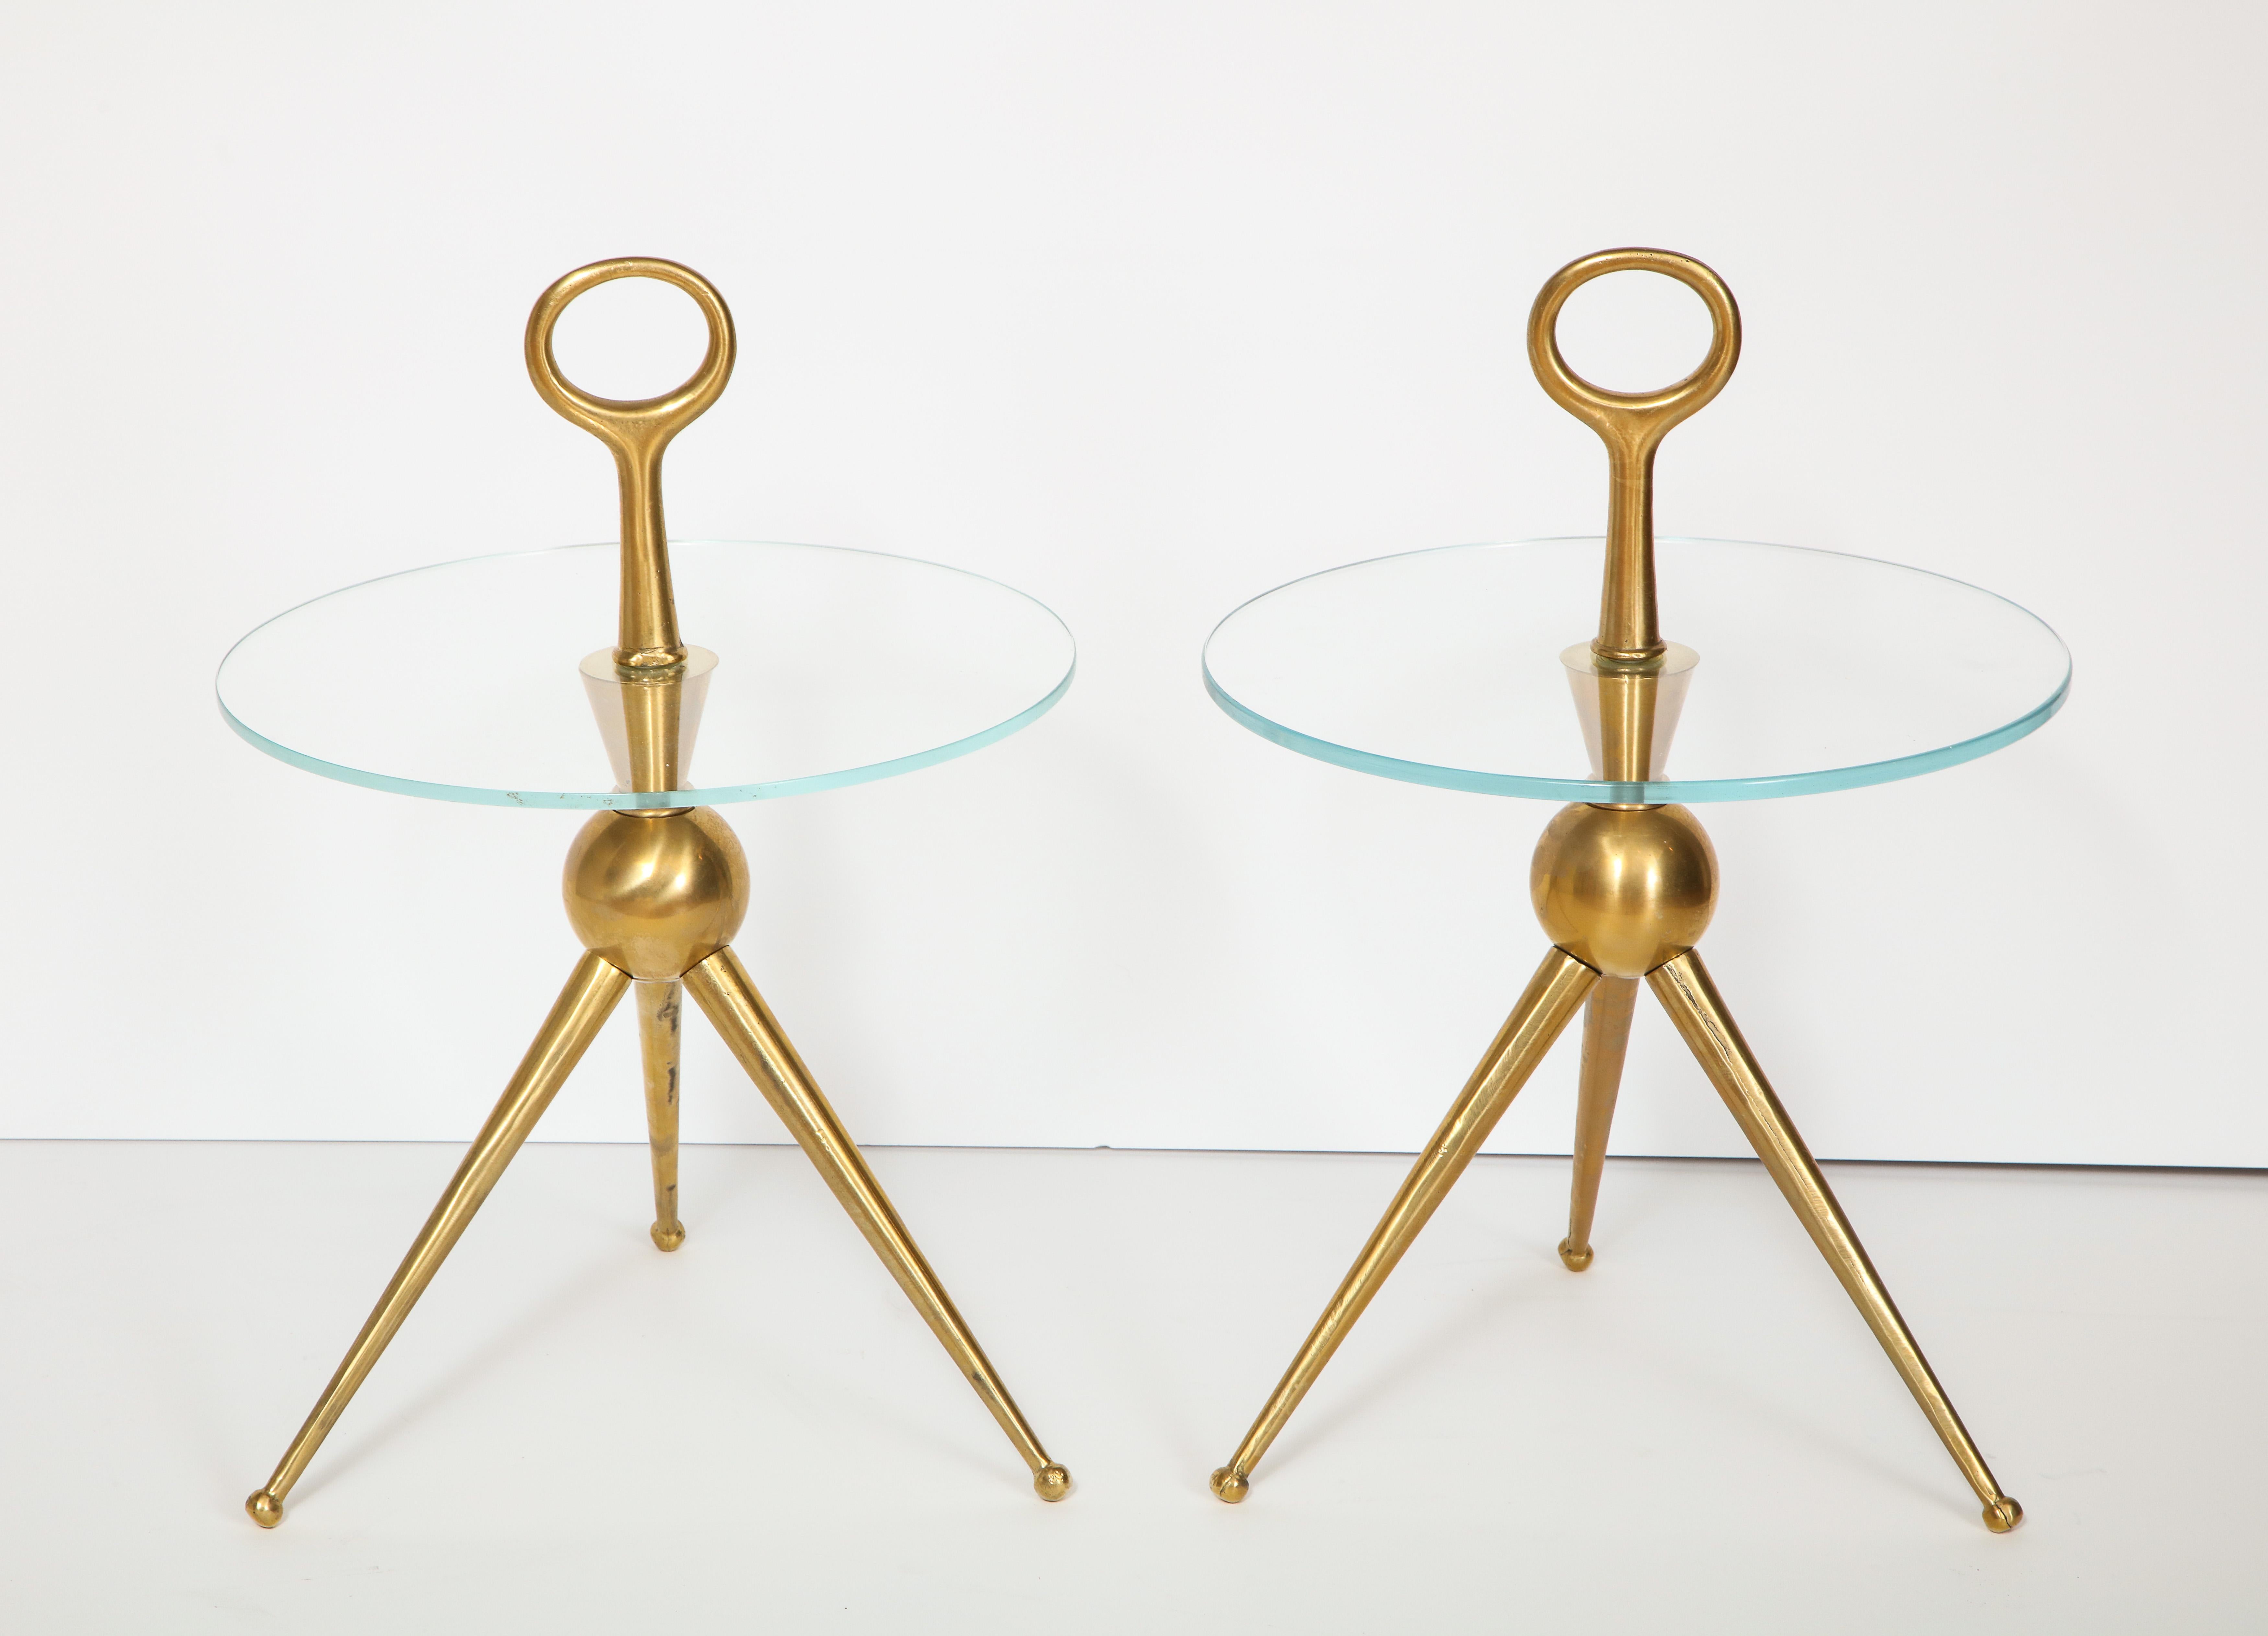 Pair of Handcrafted Solid Bronze and Glass Tripod Martini Side Tables, Italy 2